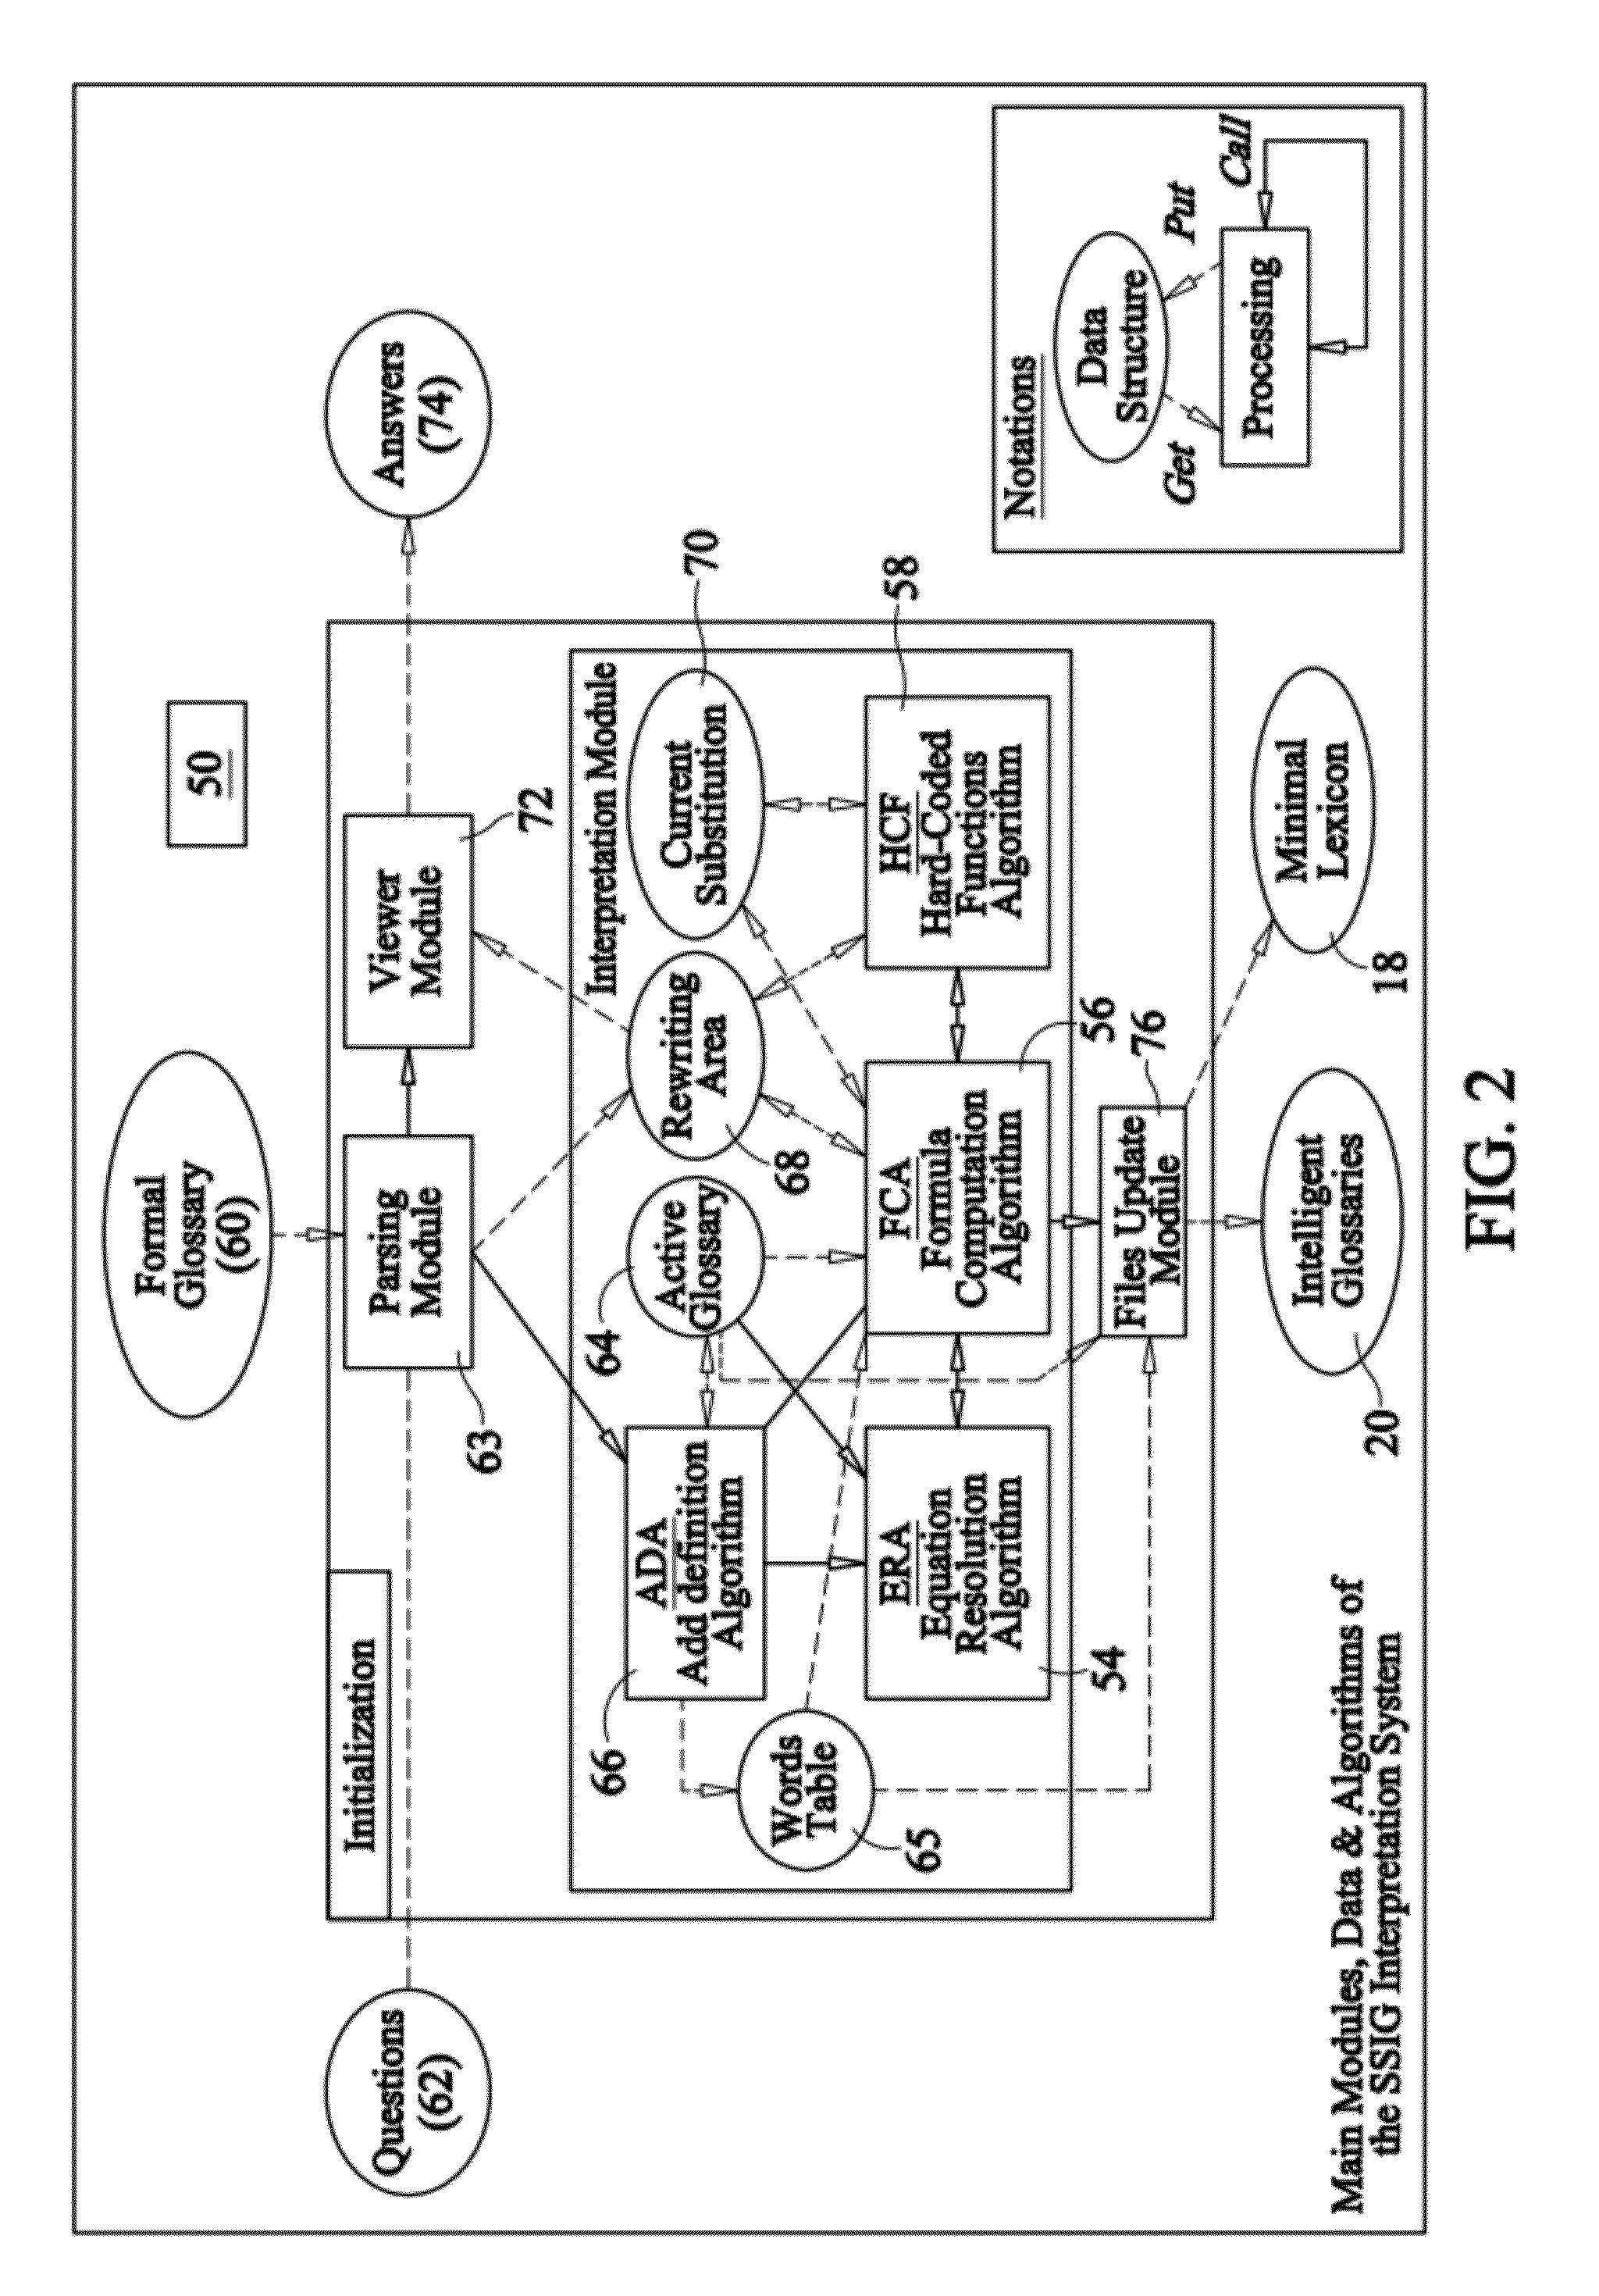 Methods and systems for constructing intelligent glossaries from distinction-based reasoning